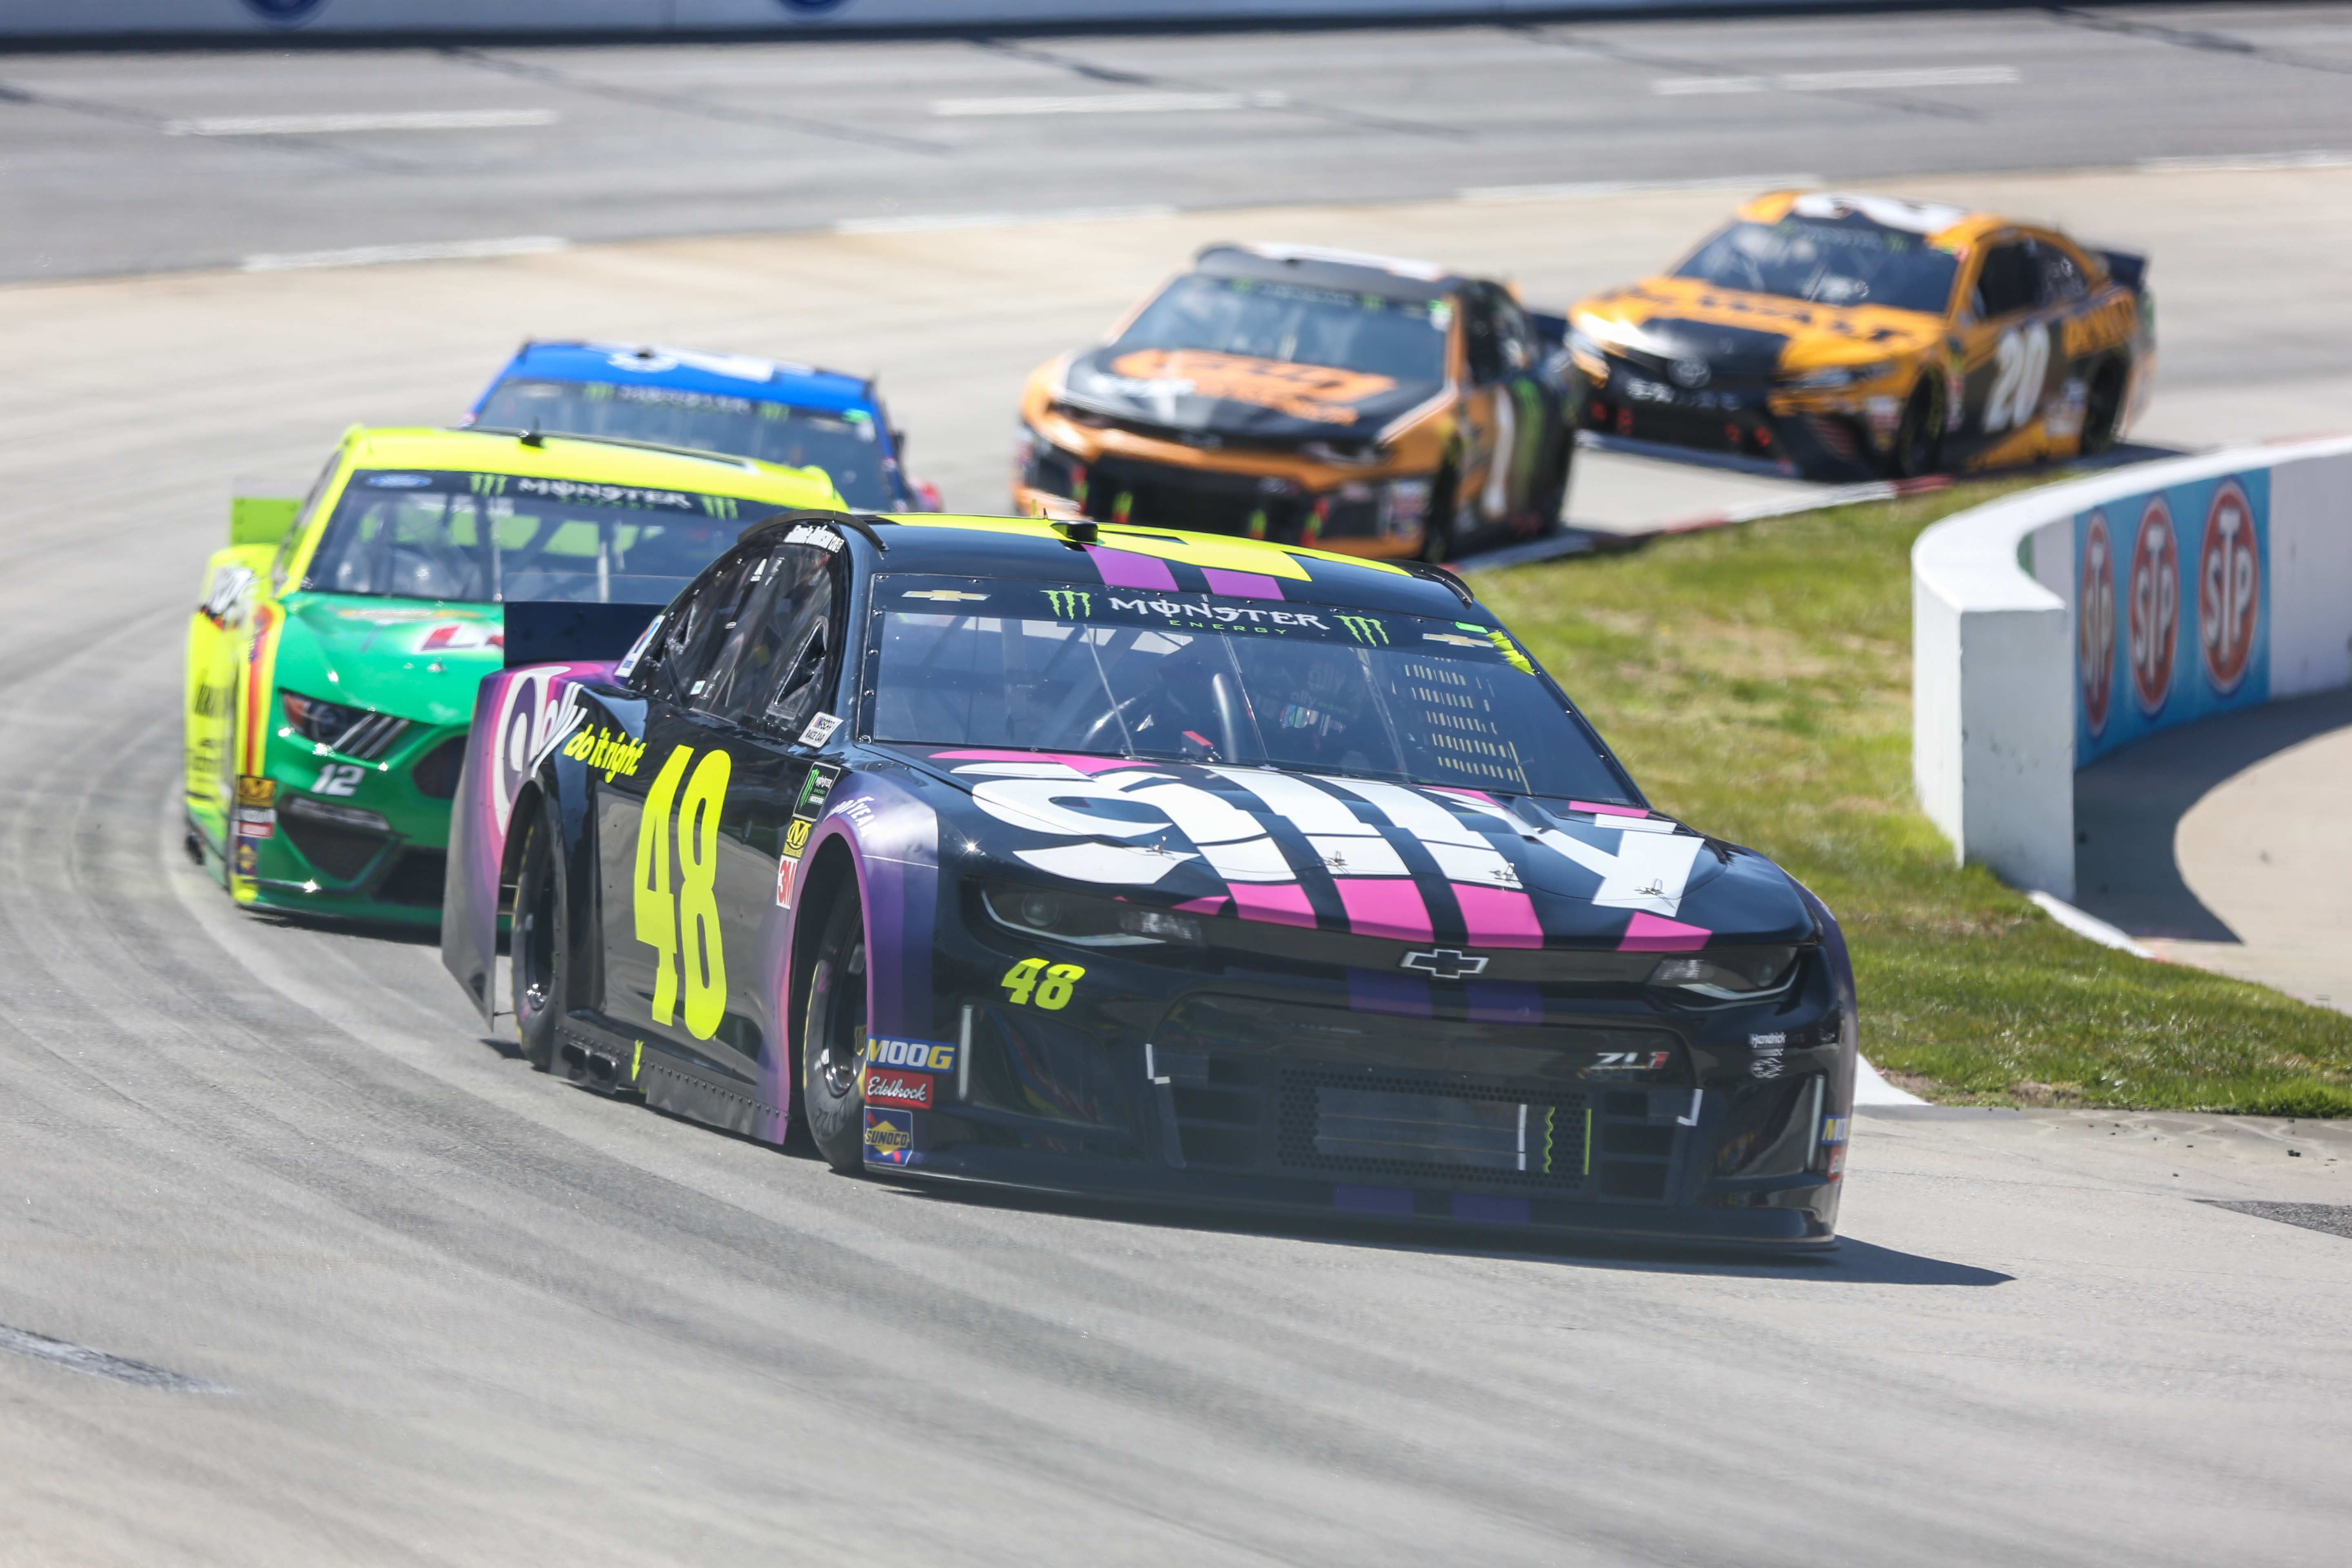 Certainly, Hendrick Motorsports aims for stronger results than shown so far in 2019. (Photo Credit: Jonathan Huff/TPF)